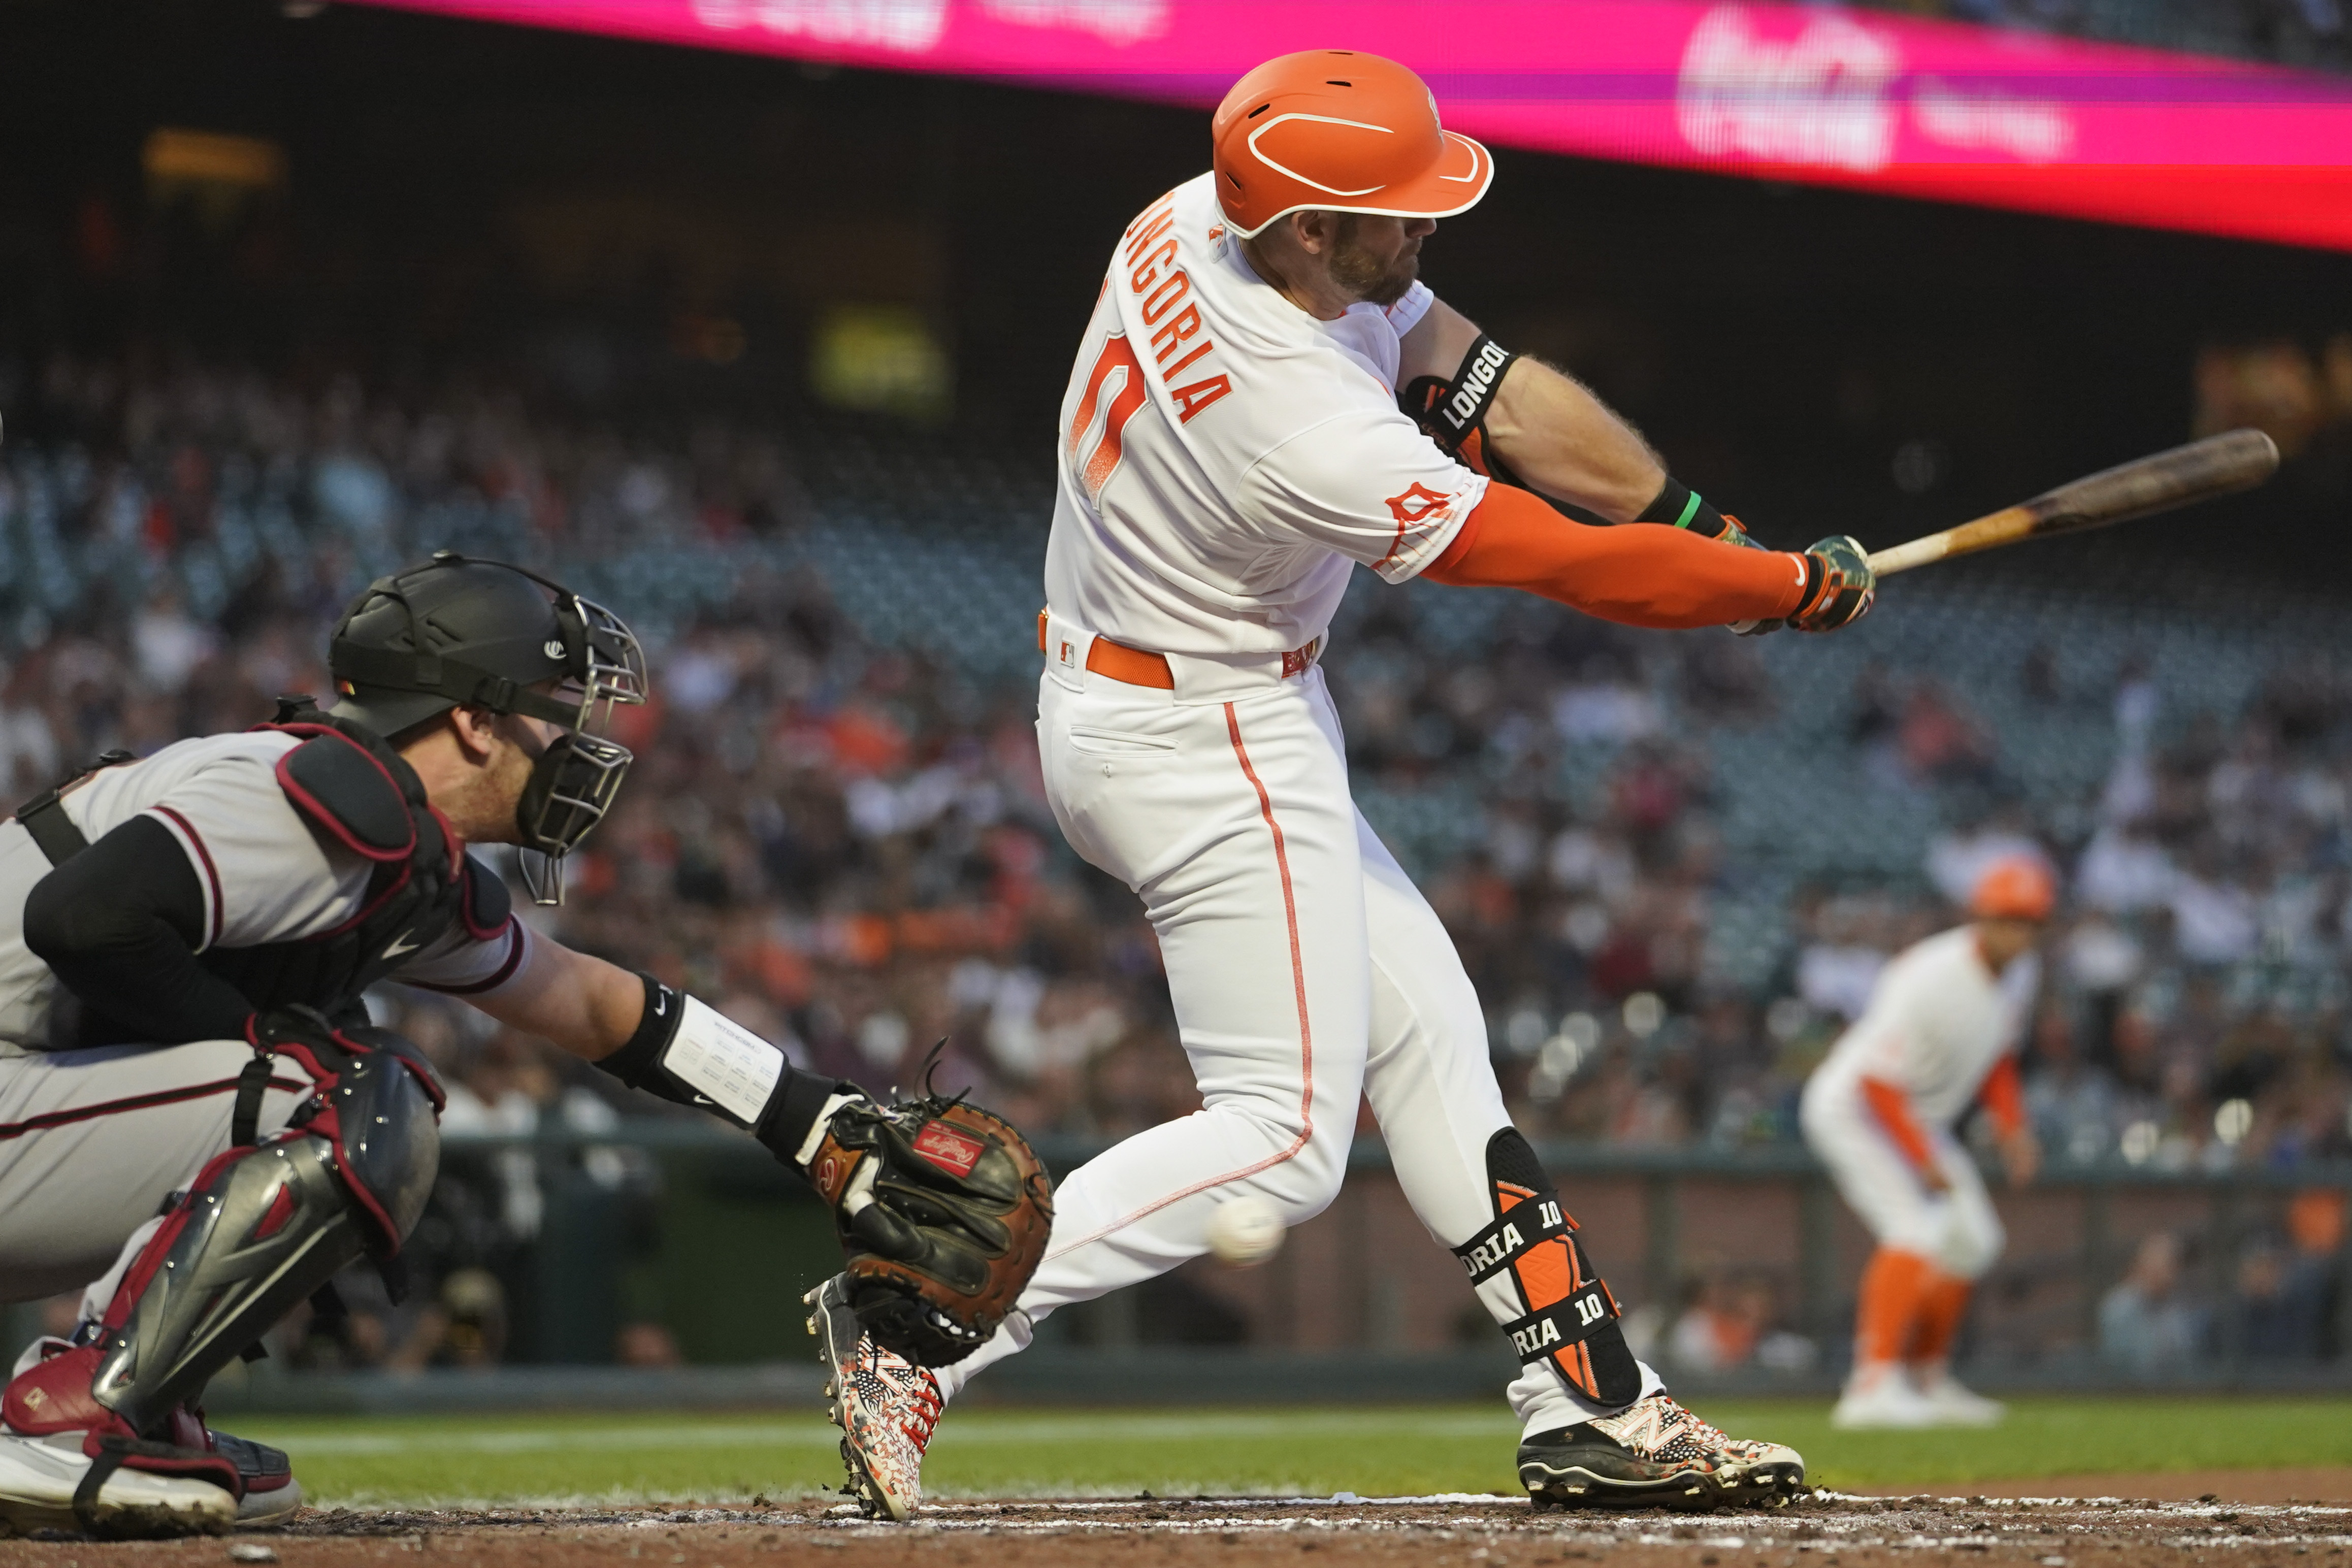 Crawford's HR with 2 outs in 9th lifts Giants past D-backs – KXAN Austin